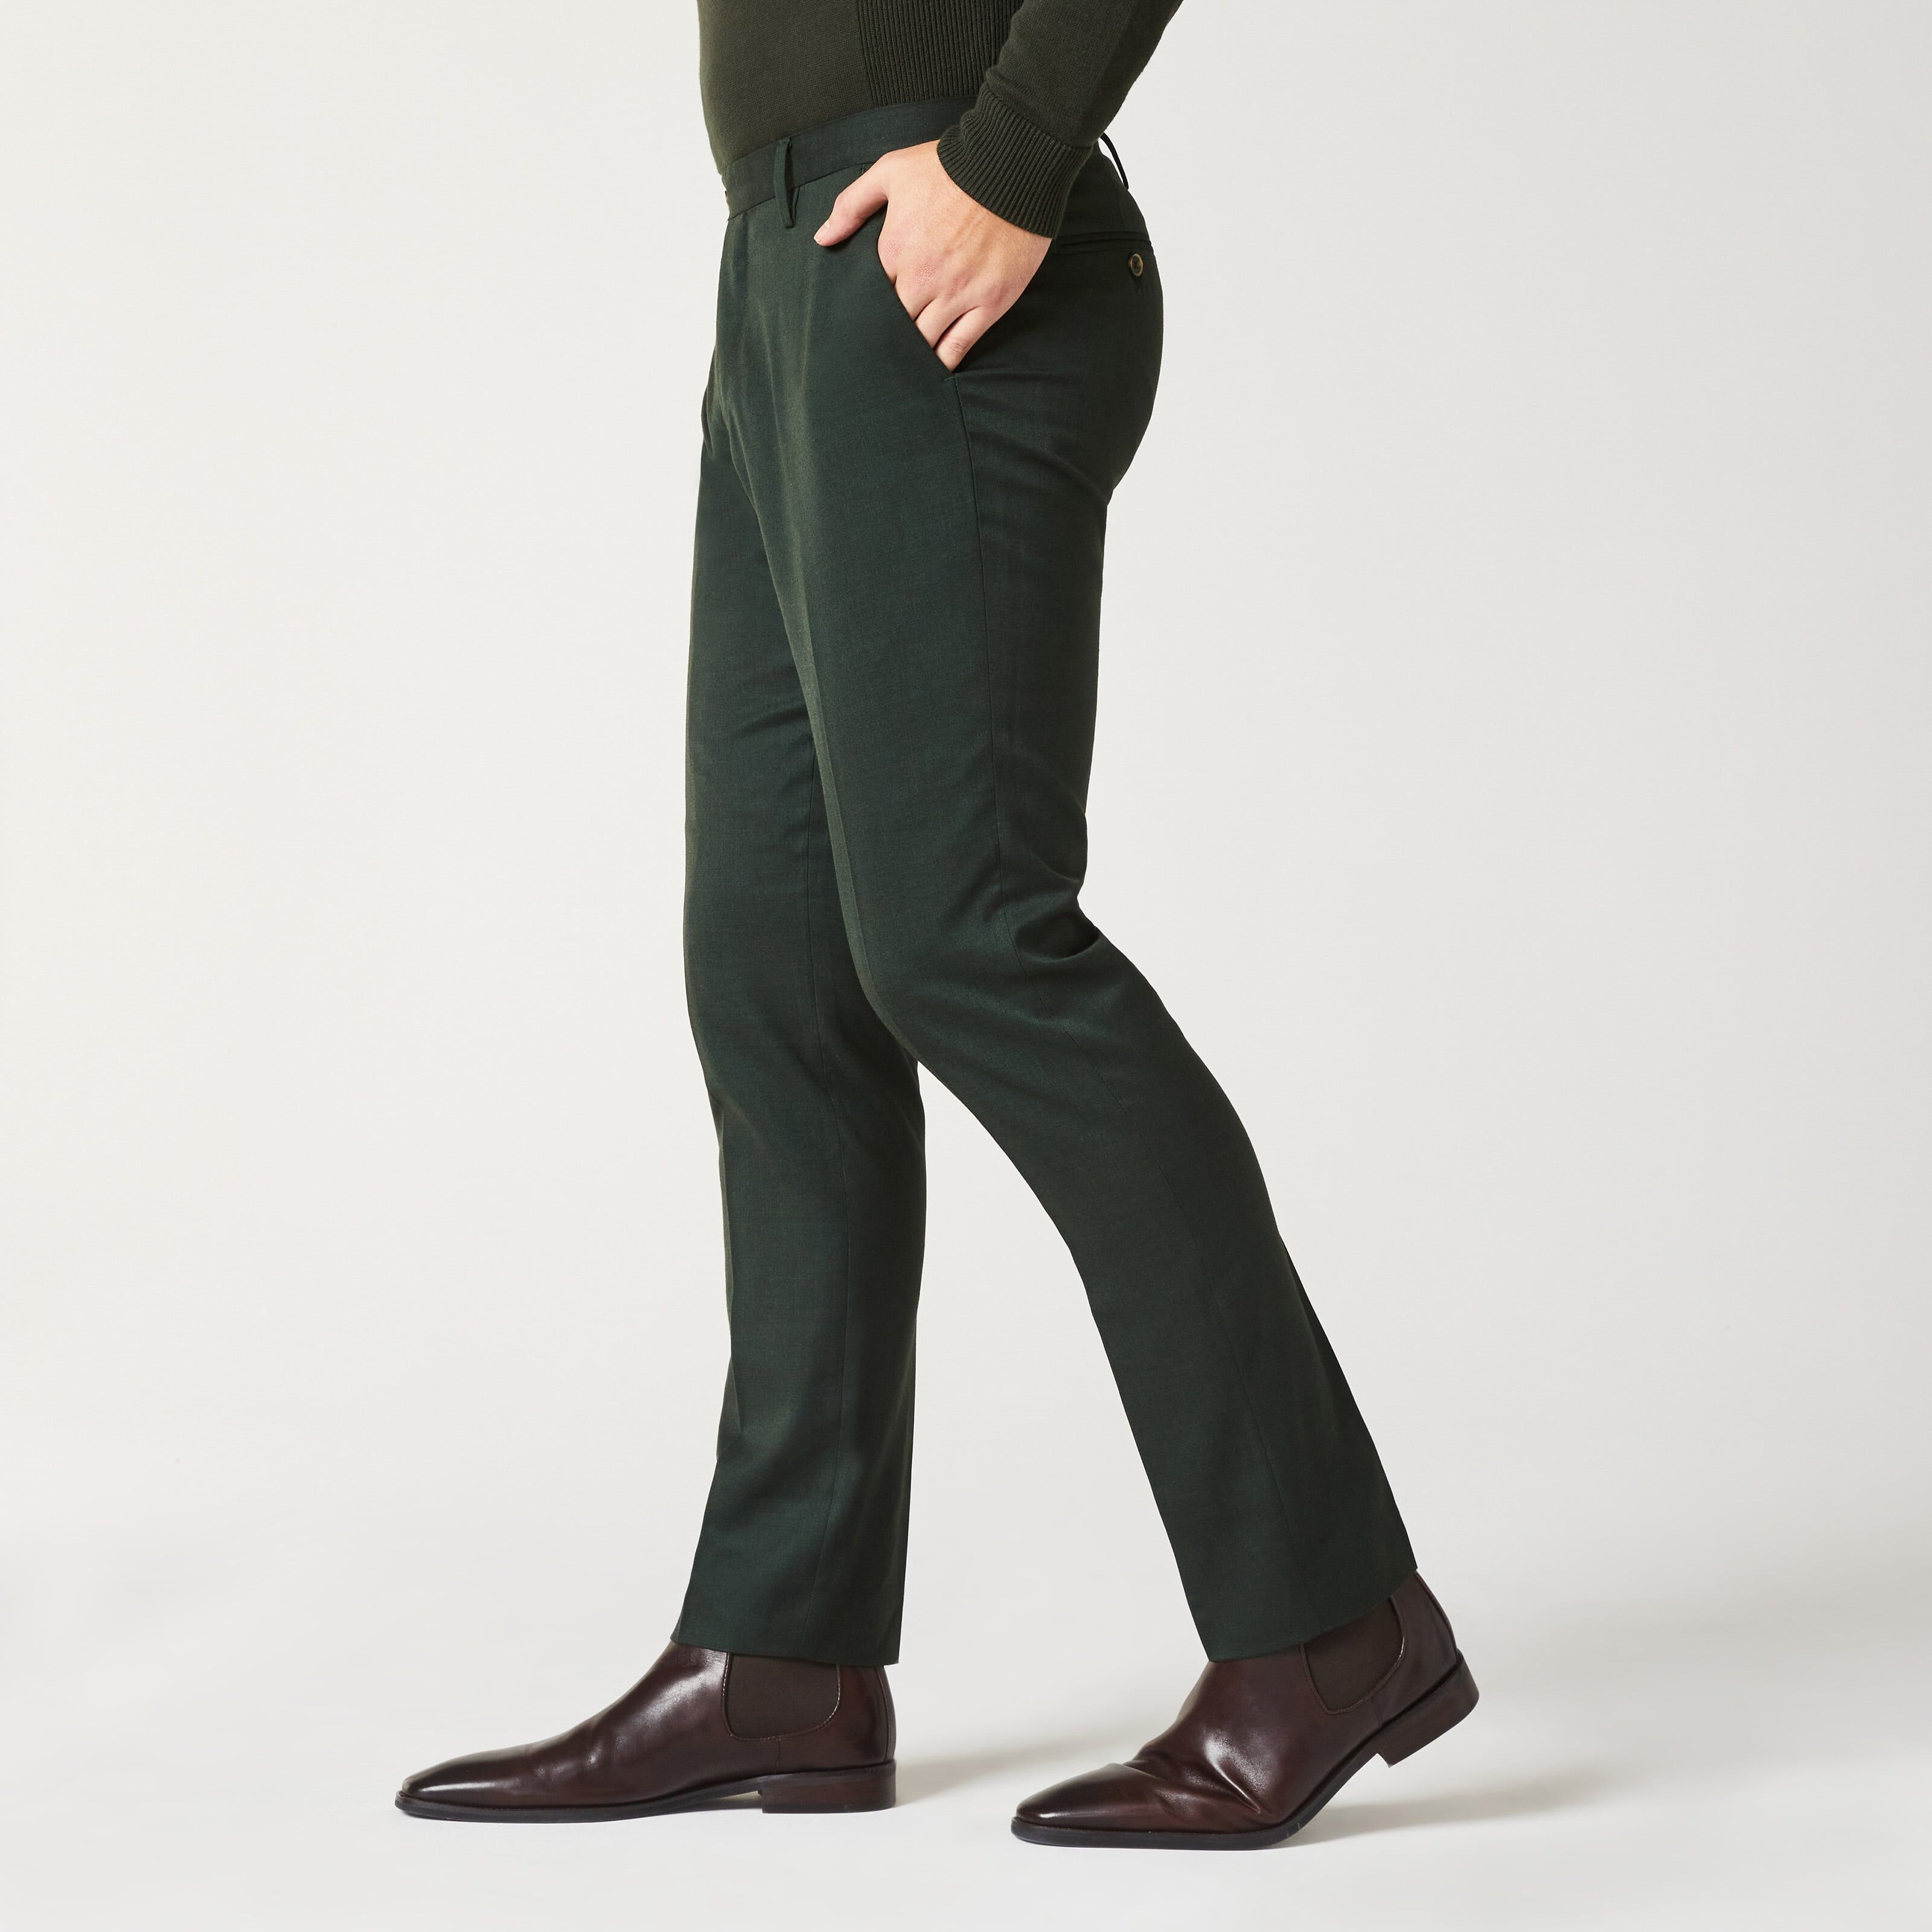 Reiss Firm Tailored Wool Suit Trousers, Green, 32R